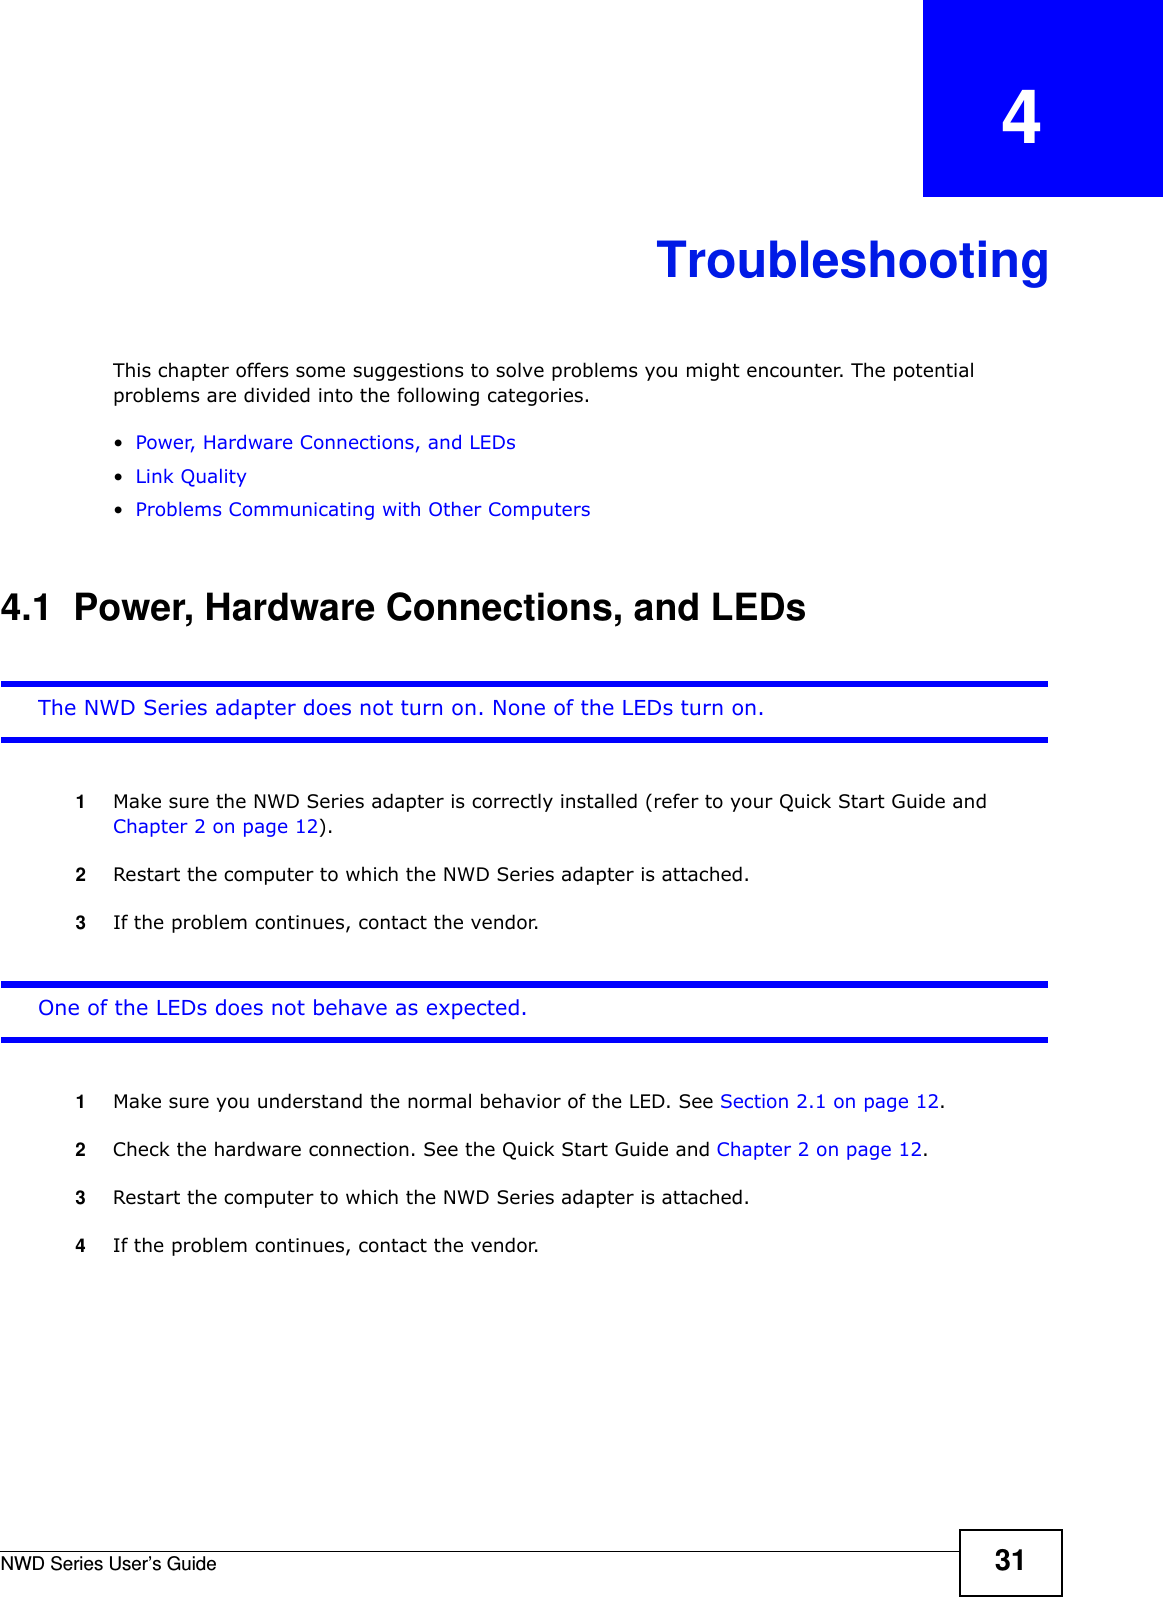 NWD Series User’s Guide 31CHAPTER   4TroubleshootingThis chapter offers some suggestions to solve problems you might encounter. The potential problems are divided into the following categories. •Power, Hardware Connections, and LEDs•Link Quality•Problems Communicating with Other Computers4.1  Power, Hardware Connections, and LEDsThe NWD Series adapter does not turn on. None of the LEDs turn on.1Make sure the NWD Series adapter is correctly installed (refer to your Quick Start Guide and Chapter 2 on page 12).2Restart the computer to which the NWD Series adapter is attached.3If the problem continues, contact the vendor.One of the LEDs does not behave as expected.1Make sure you understand the normal behavior of the LED. See Section 2.1 on page 12.2Check the hardware connection. See the Quick Start Guide and Chapter 2 on page 12. 3Restart the computer to which the NWD Series adapter is attached.4If the problem continues, contact the vendor.